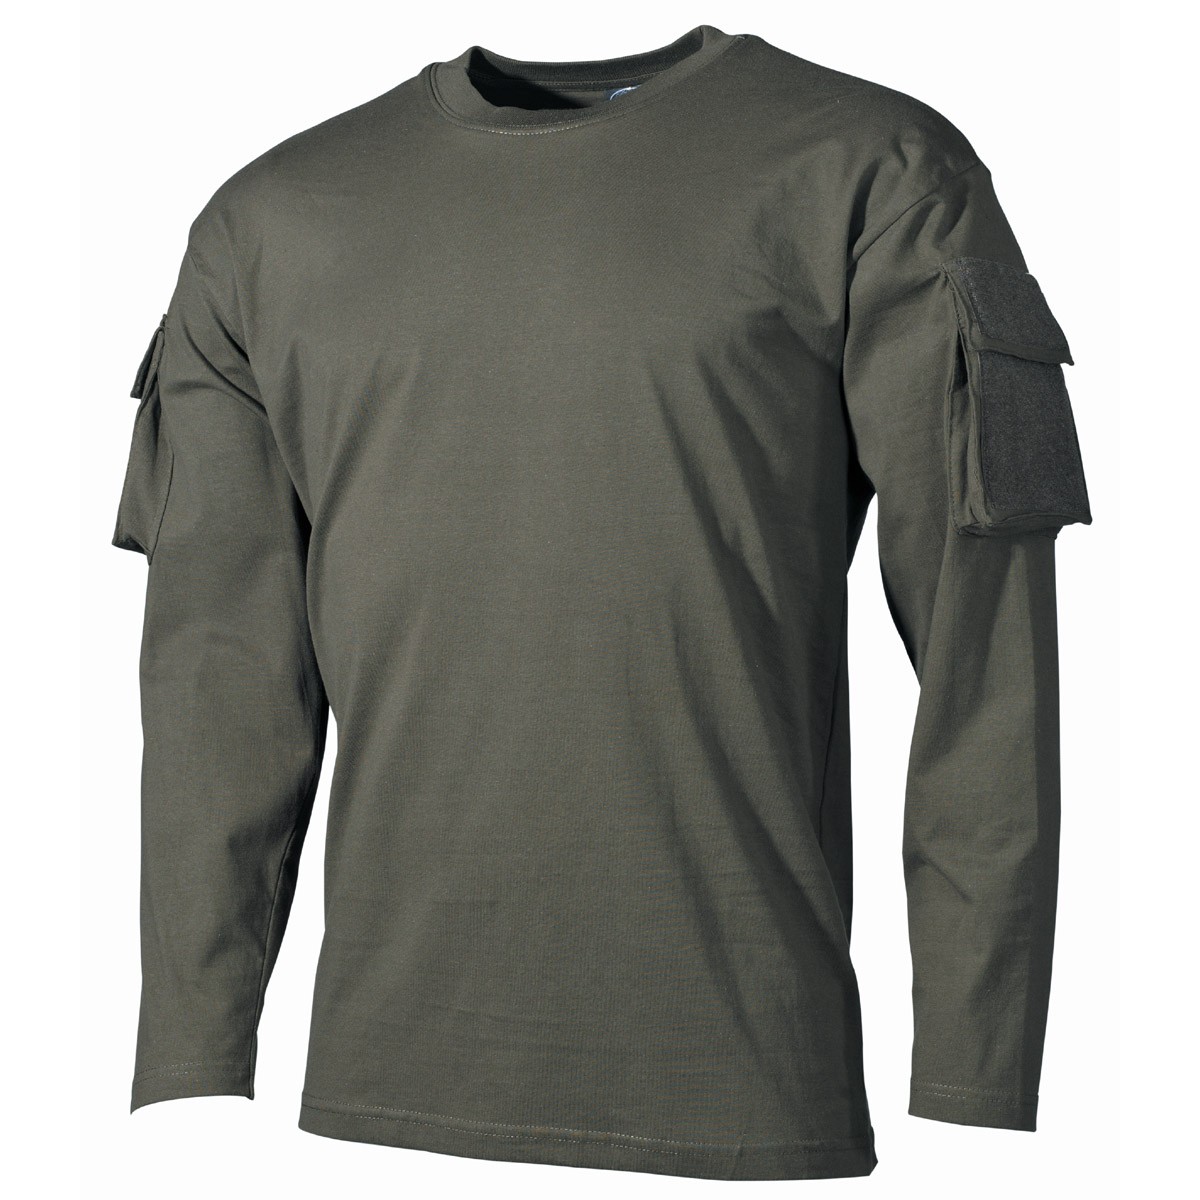 Tactical Military Army Special Ops Combat T-Shirt - OD Green - Long Sleeve